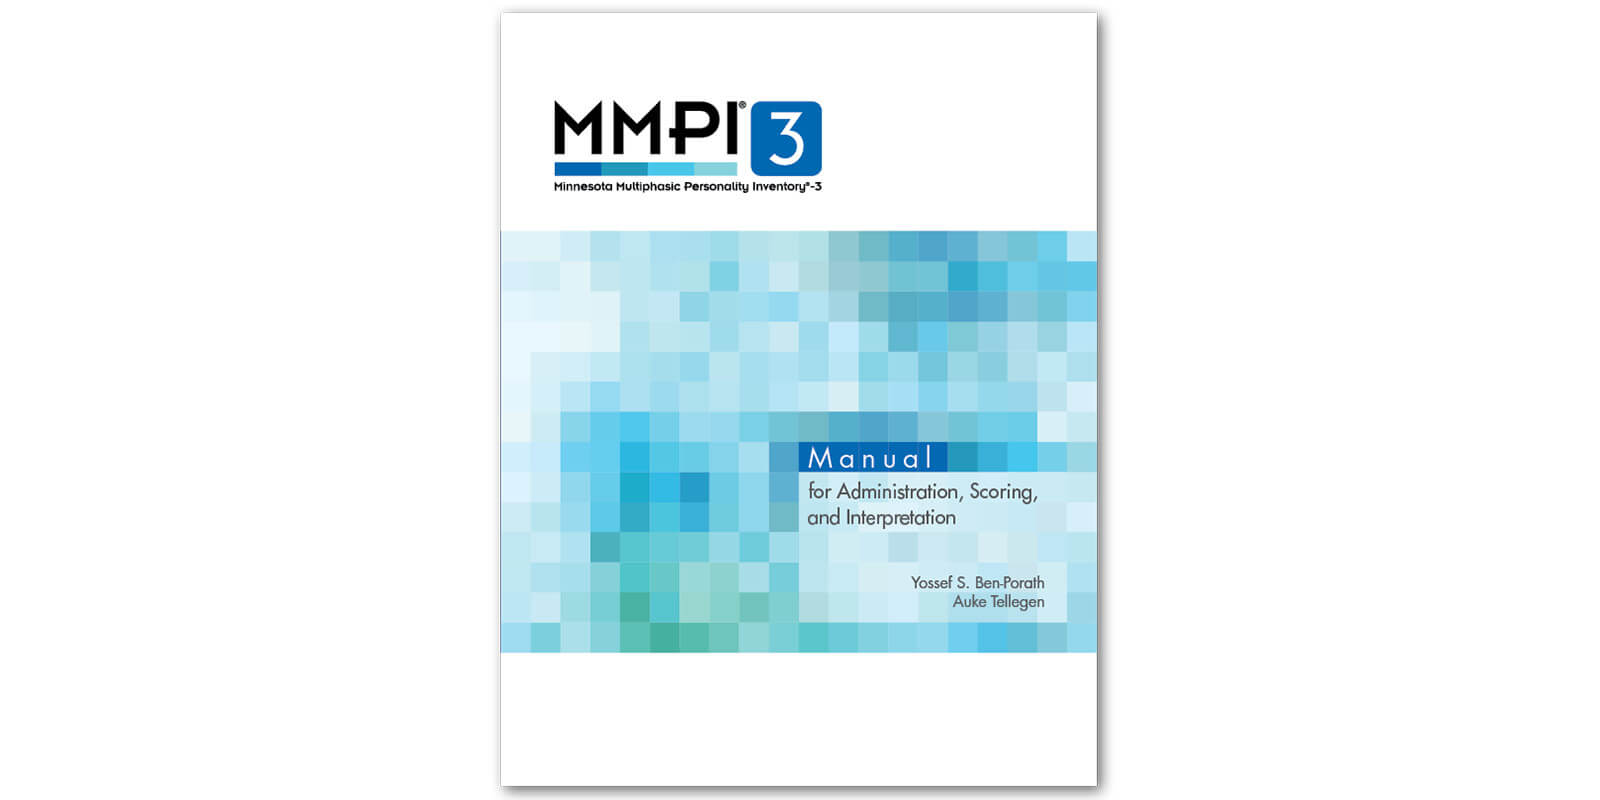 Minnesota Multiphasic Personality Inventory-3 (MMPI-3) - 